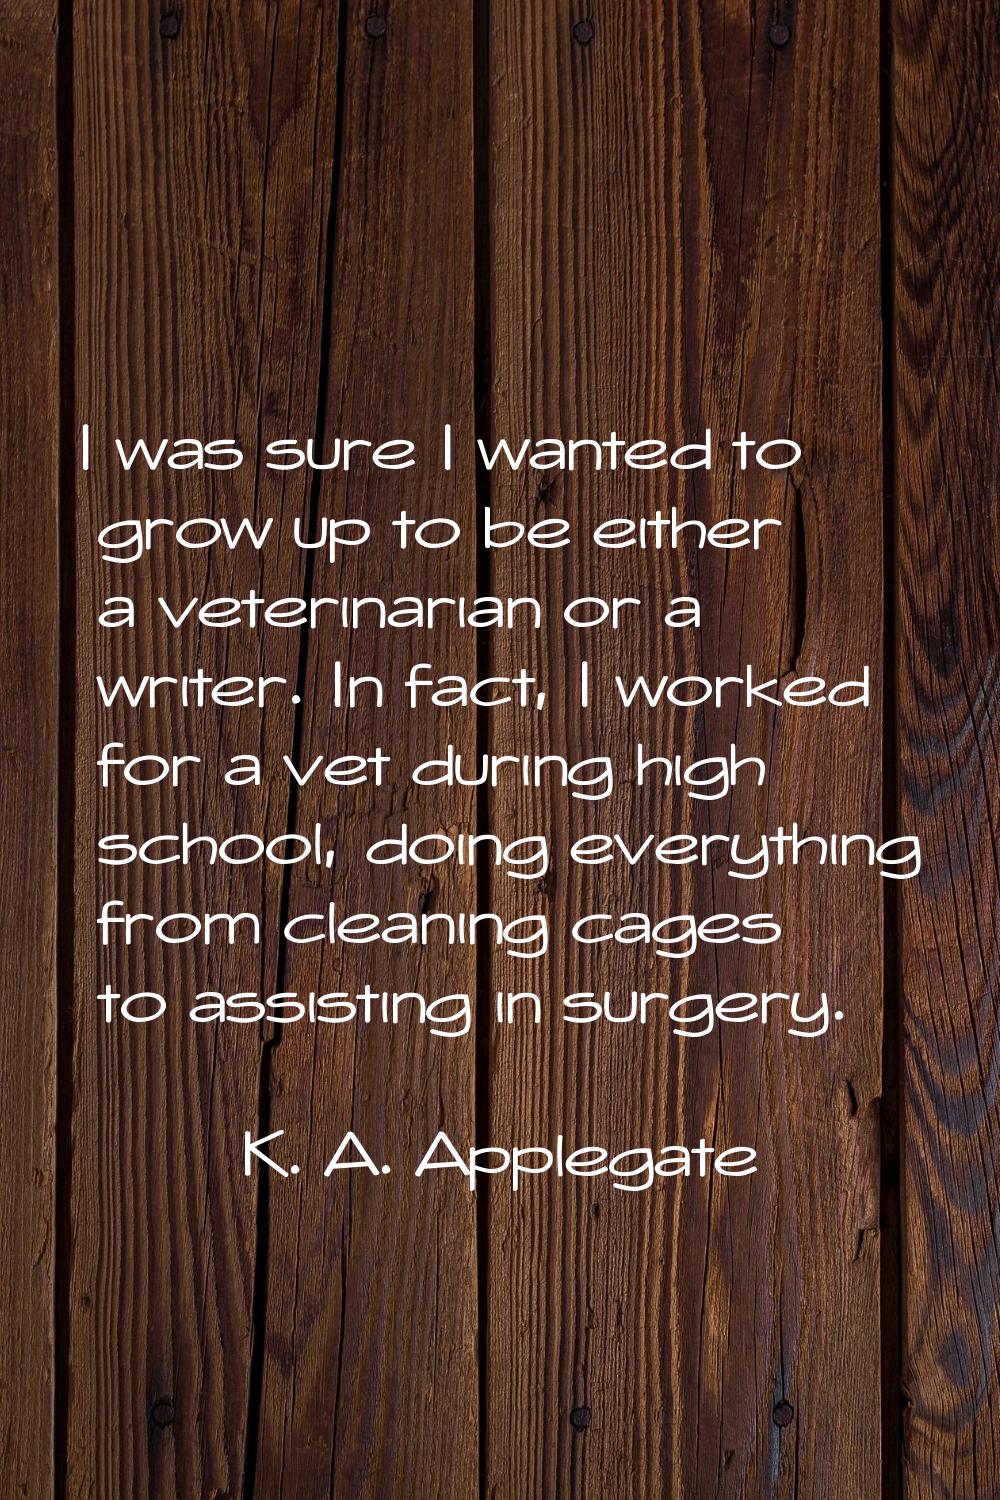 I was sure I wanted to grow up to be either a veterinarian or a writer. In fact, I worked for a vet